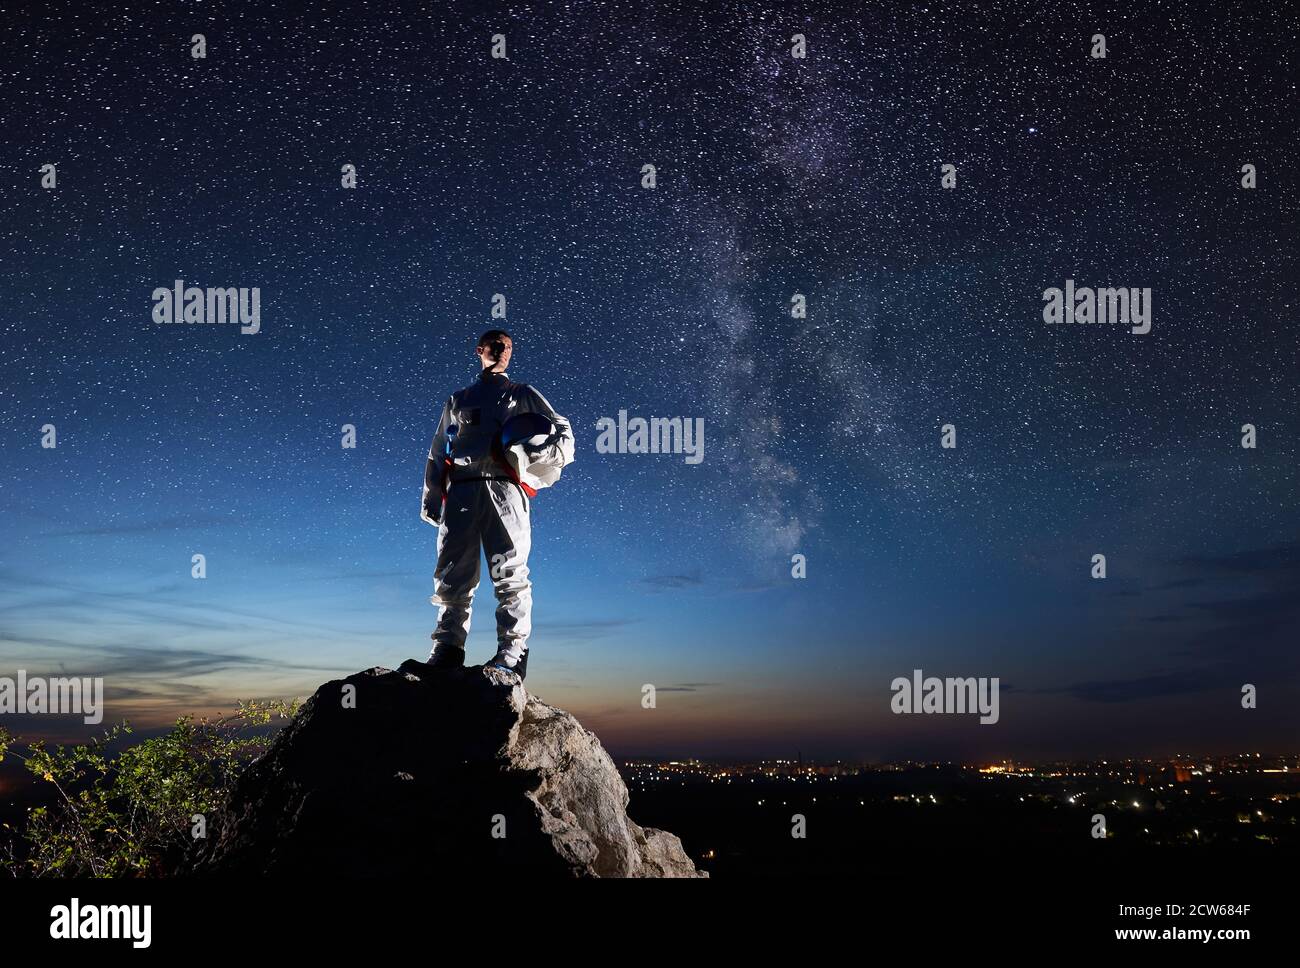 Space traveler standing on top of rocky hill and looking at beautiful sky with stars. Astronaut in white space suit holding helmet. Concept of space travel and cosmonautics. Stock Photo